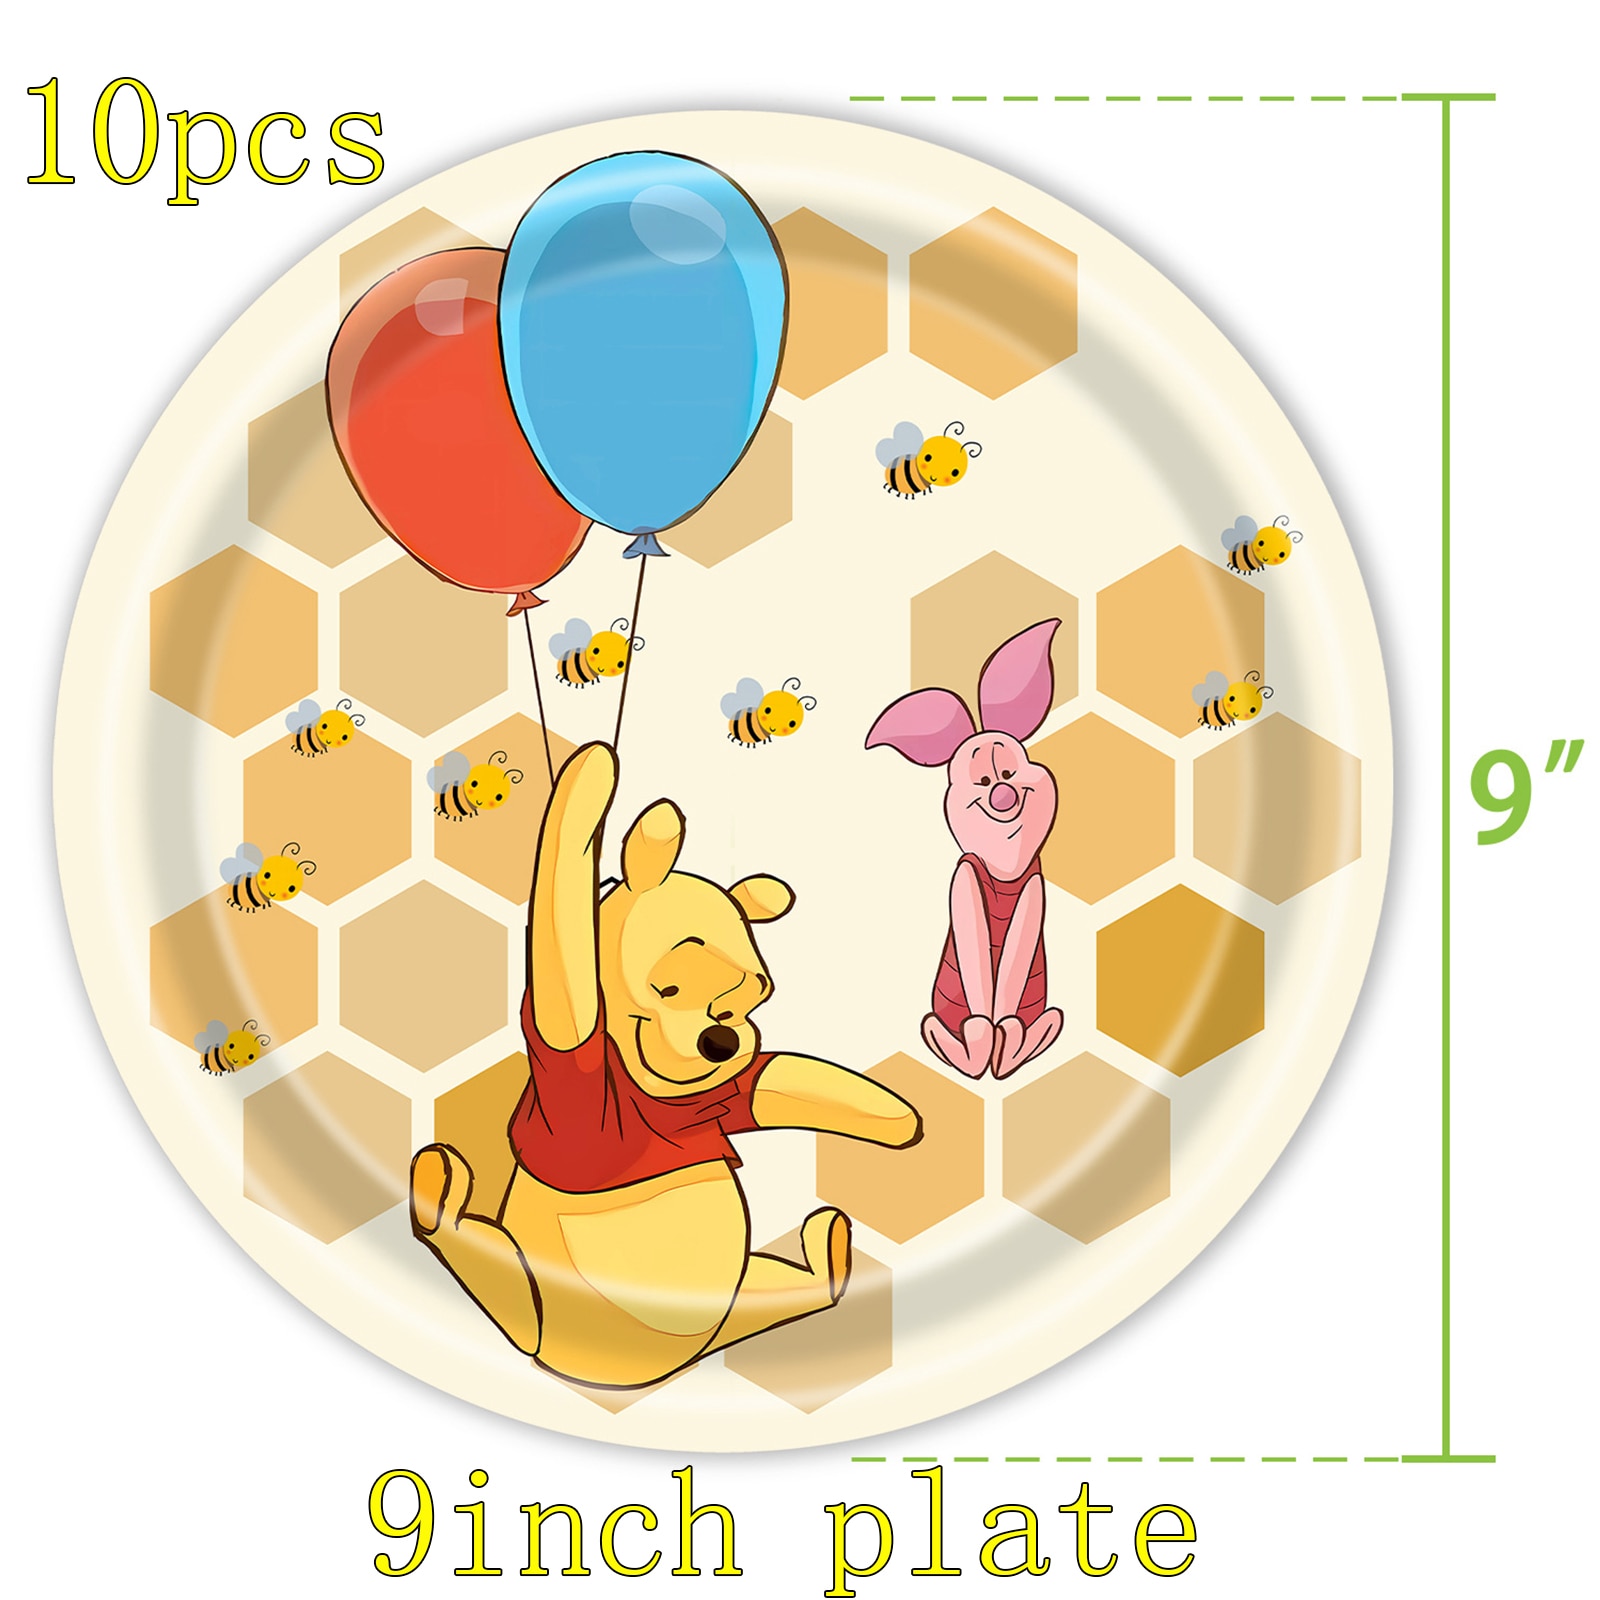 Winnie The Pooh Birthday Party Decorations Serves 10 Guests Plates Napkins Table Cover Balloons Banner For 2 - Winnie The Pooh Plush